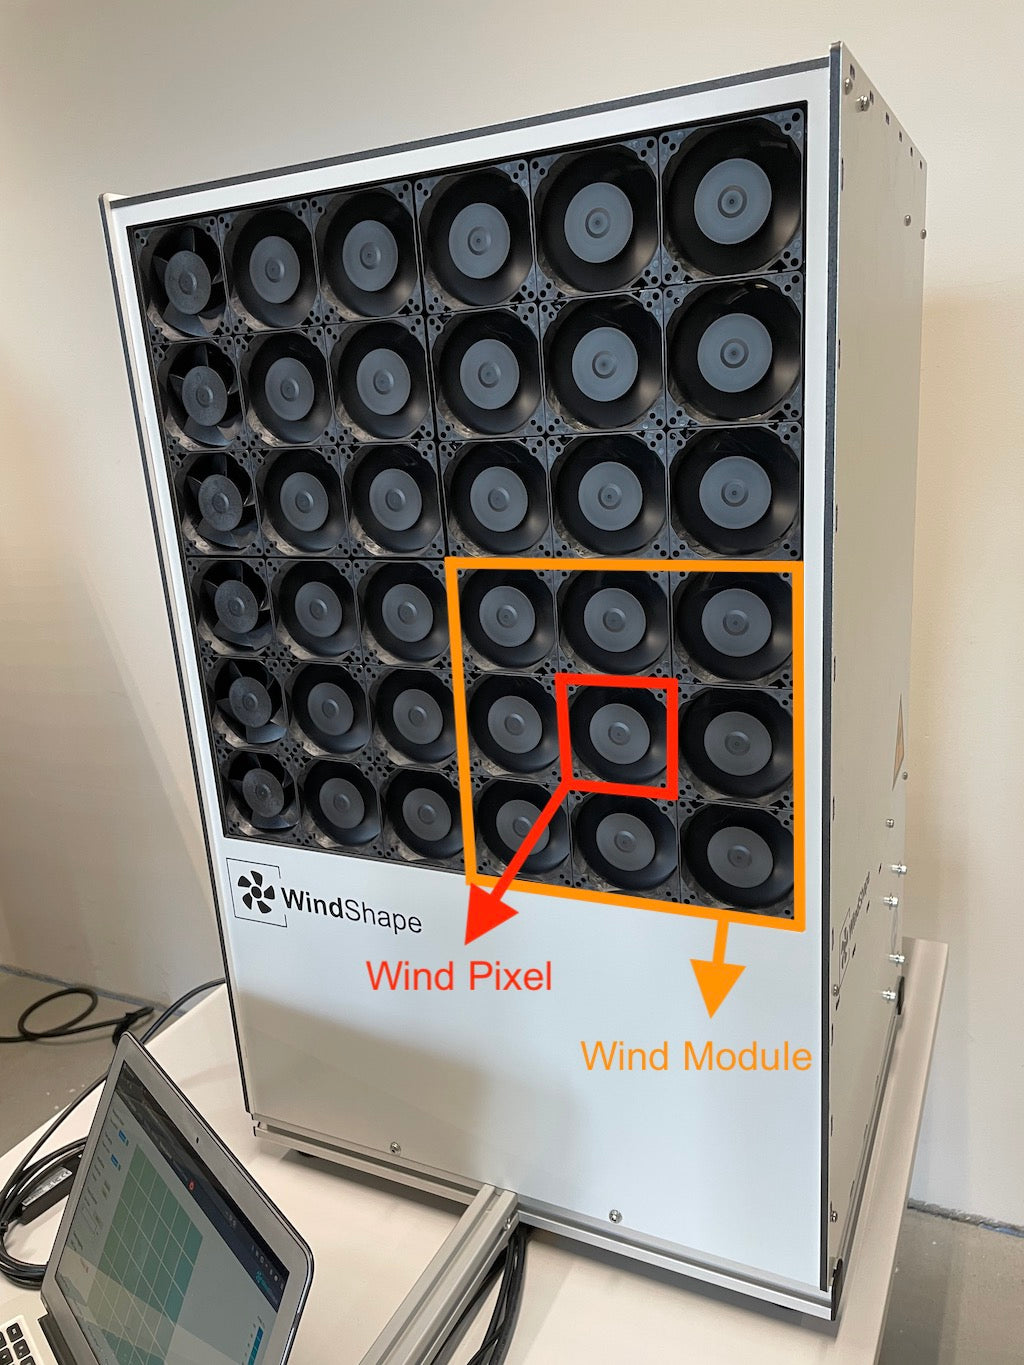 Labelled wind module and wind pixel